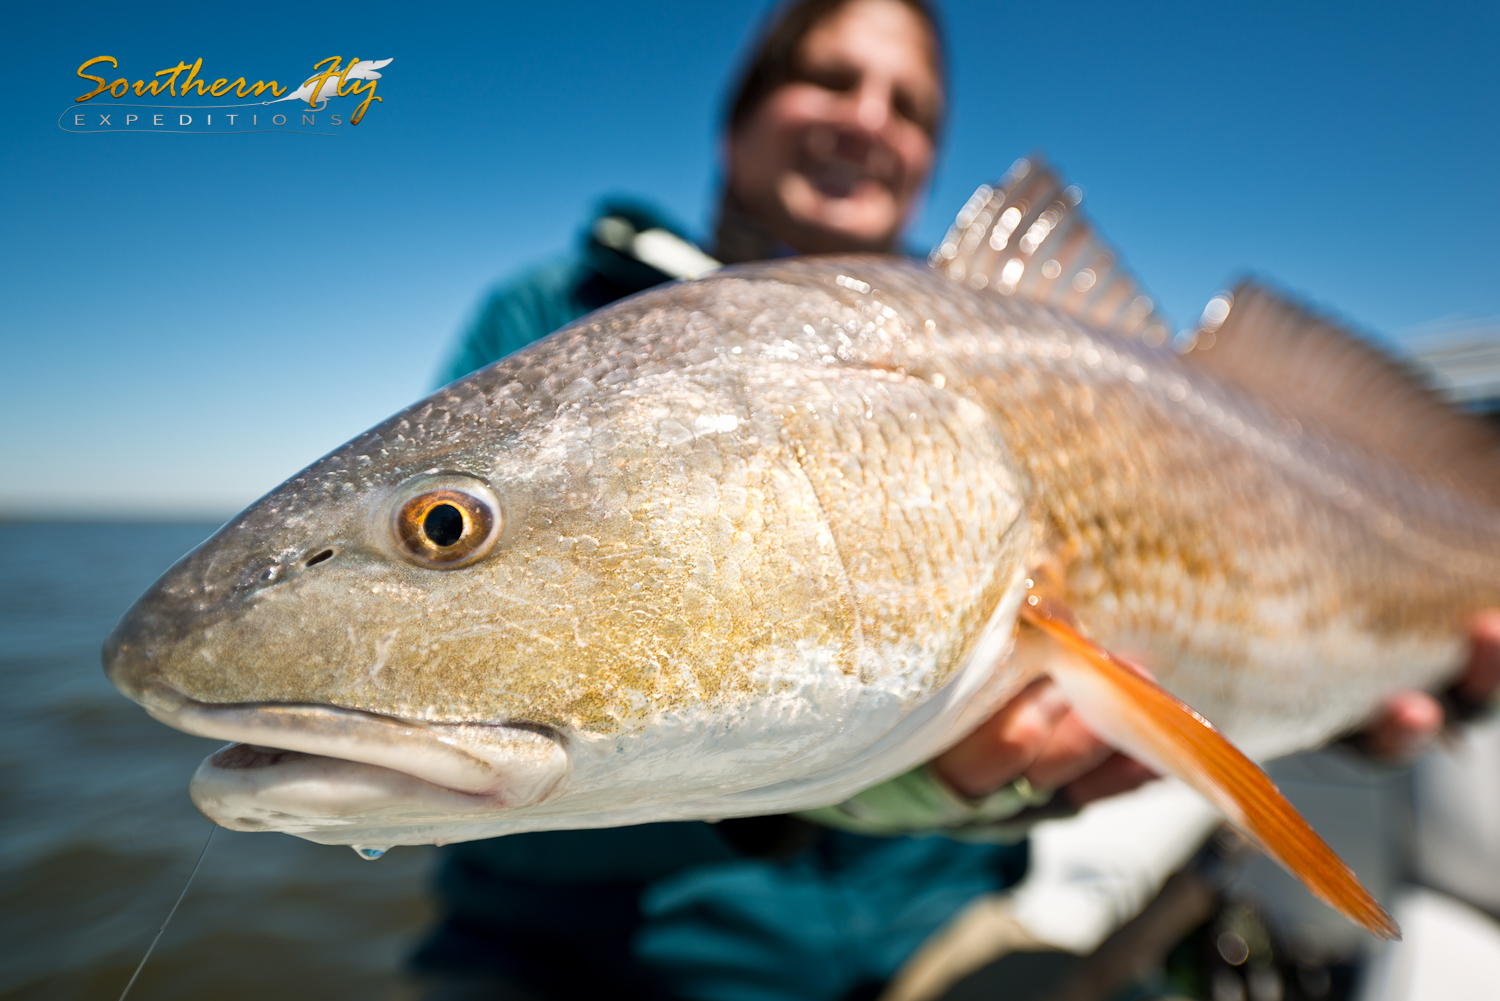 Casting for Redfish hooks a Good Sized Redfish Southern Fly Expeditions New Orleans Louisiana Fly Fishing 